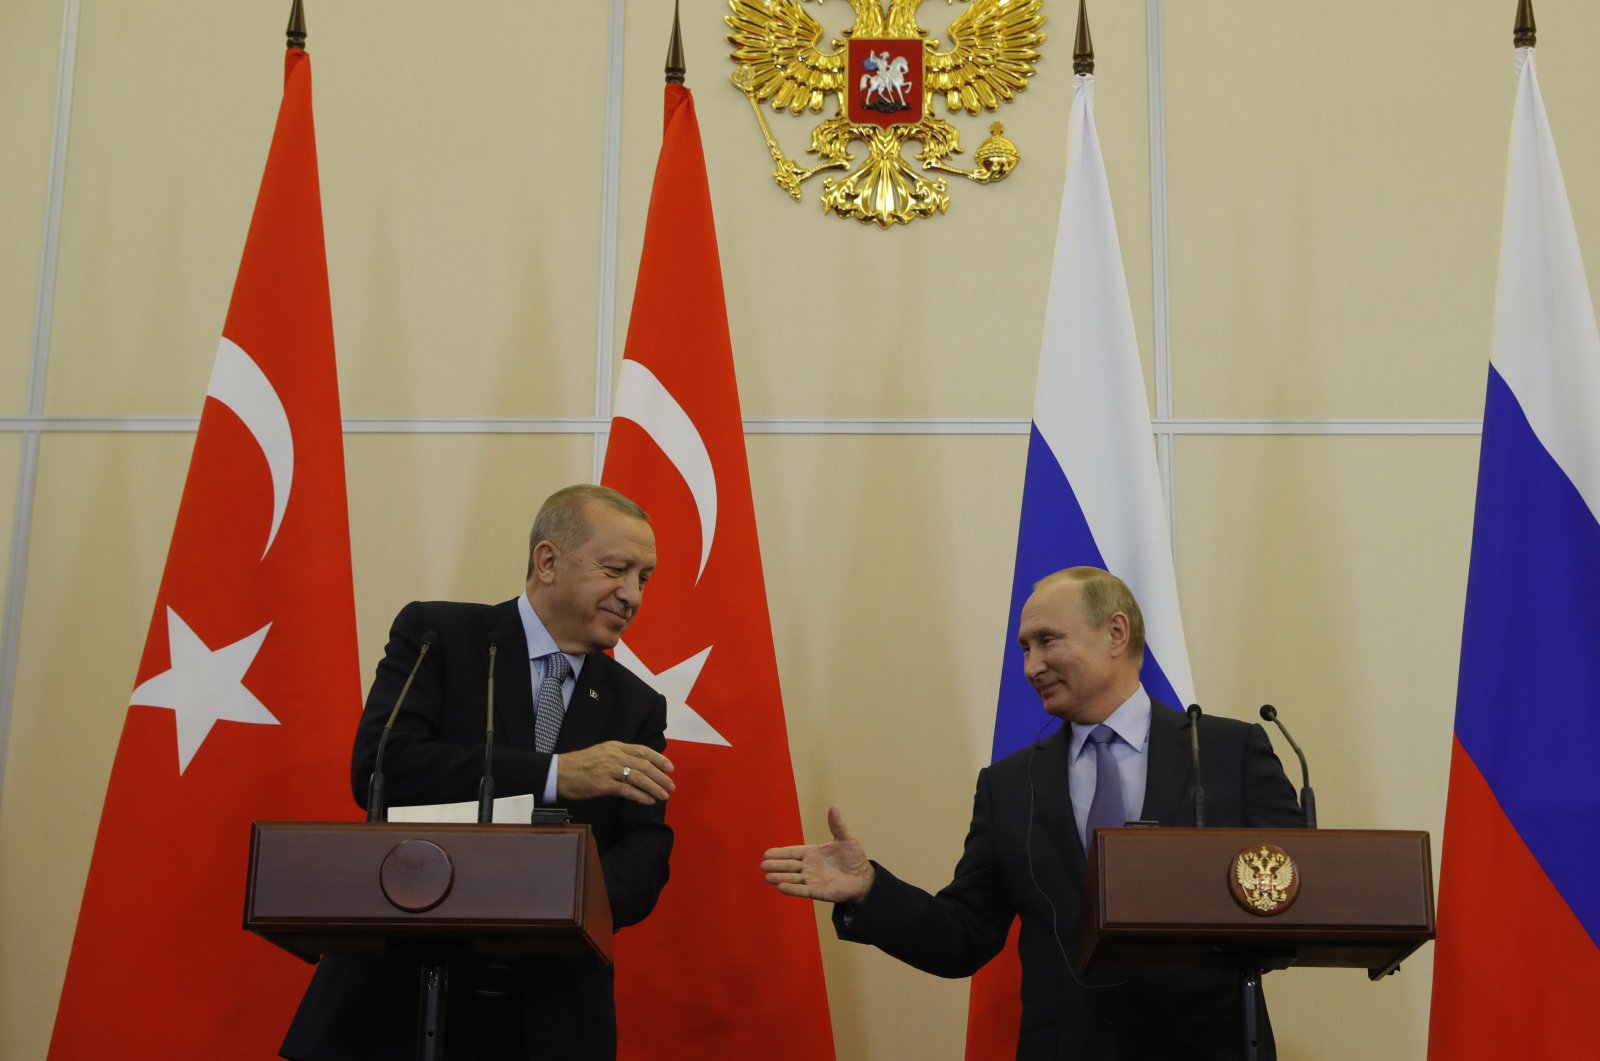 President Recep Tayyip Erdoğan and his Russian counterpart speaking at a joint news conference in Sochi, Russia, Oct. 24, 2019. (IHA Photo) 